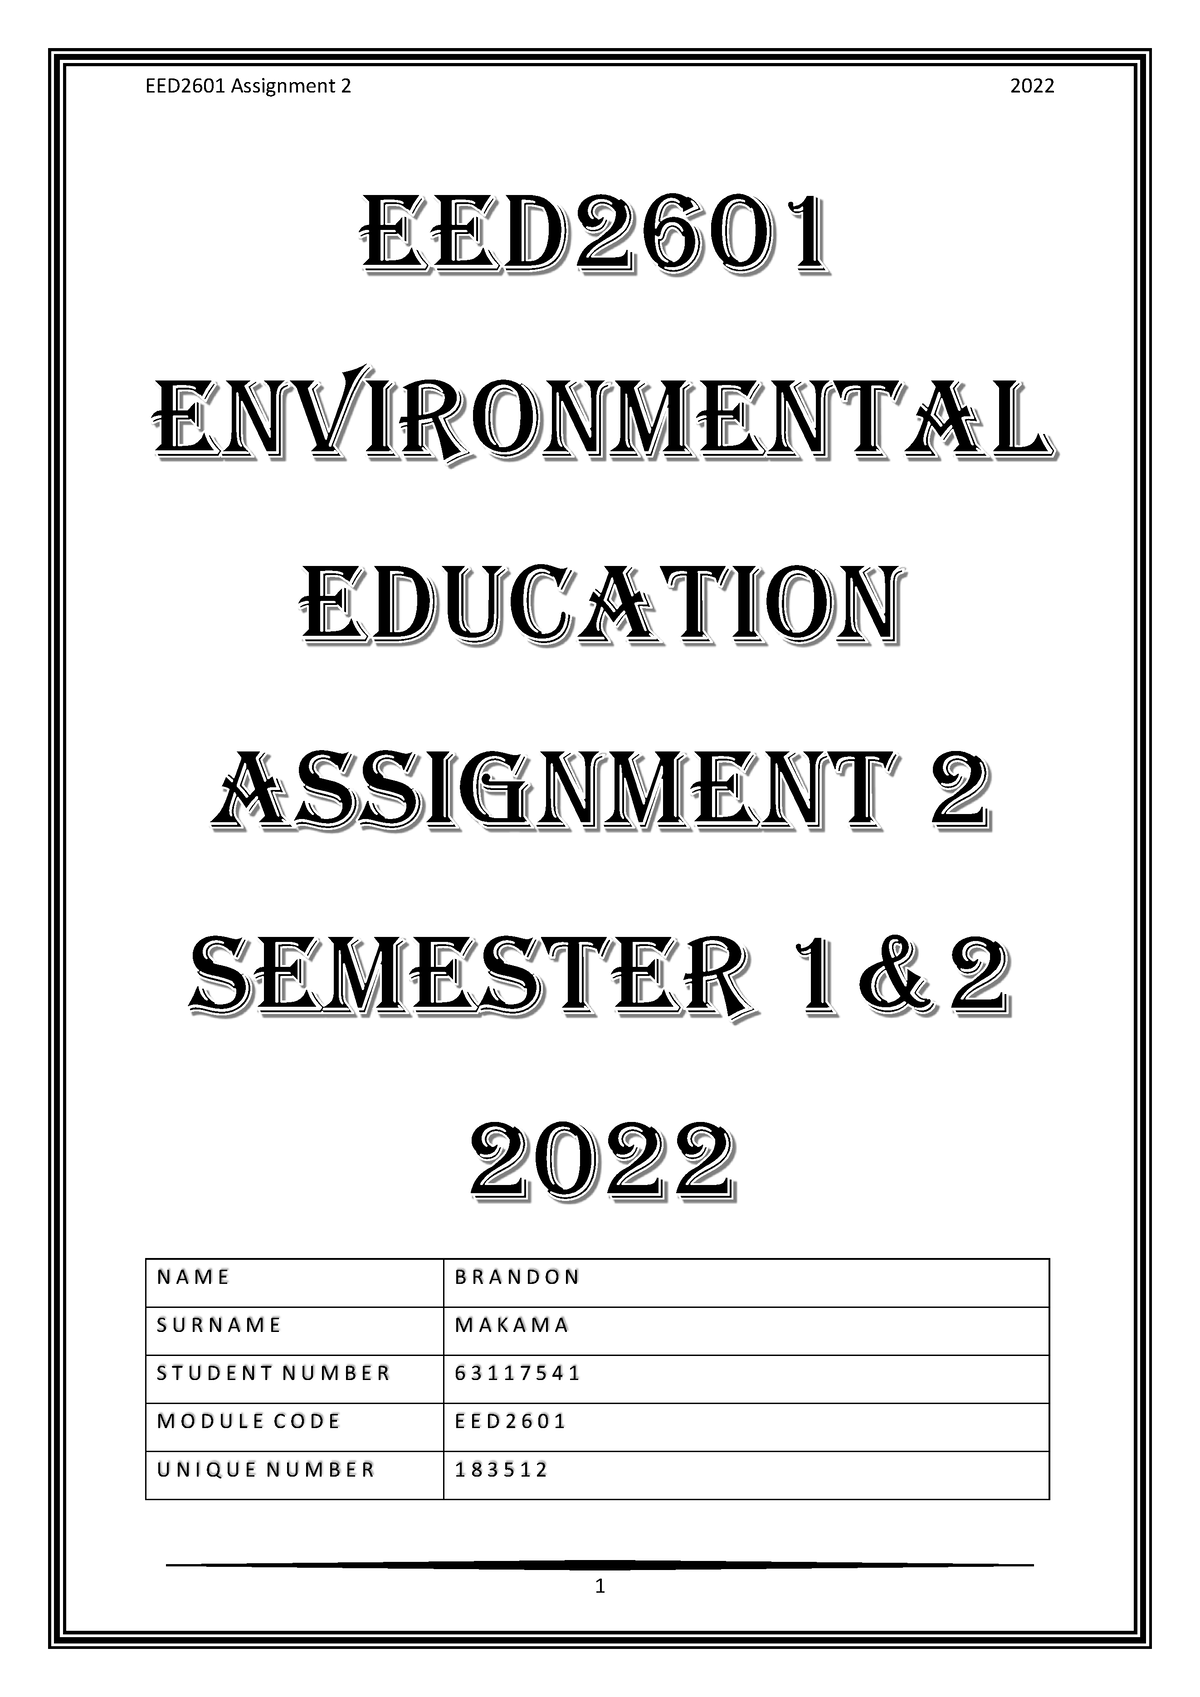 eed2601 assignment 4 answers 2023